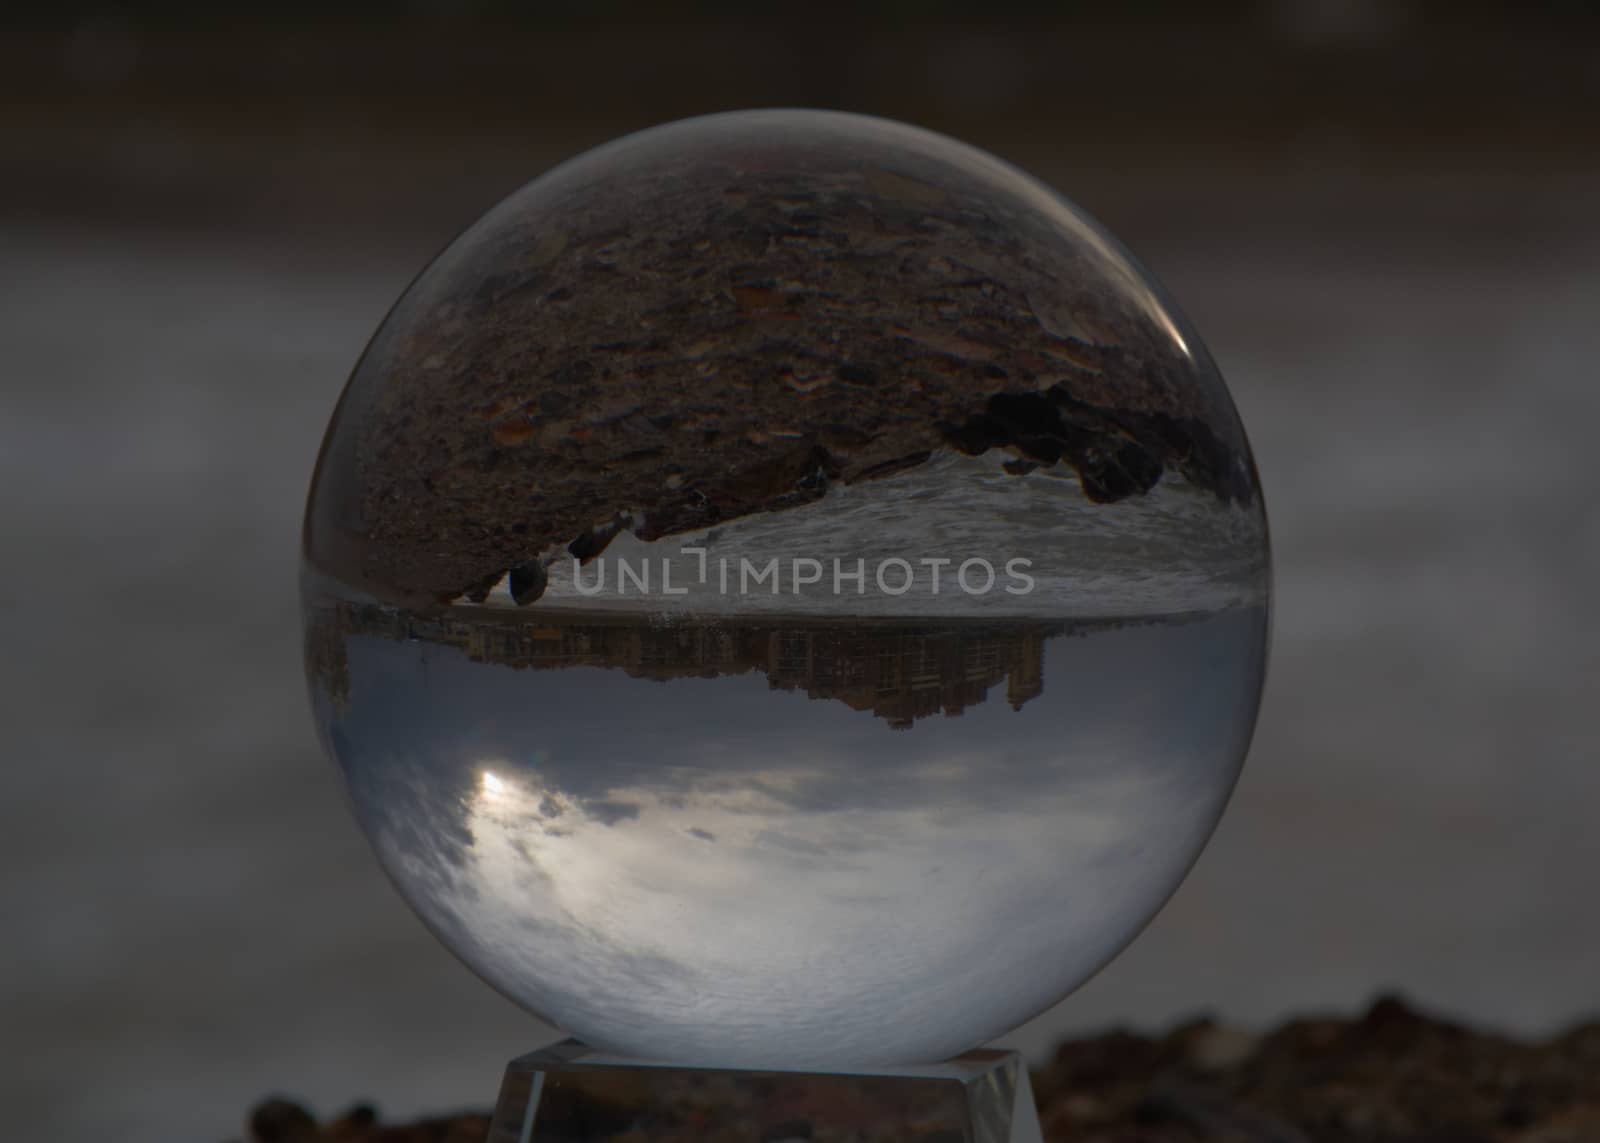 Reflections of the beach on the ball by raul_ruiz